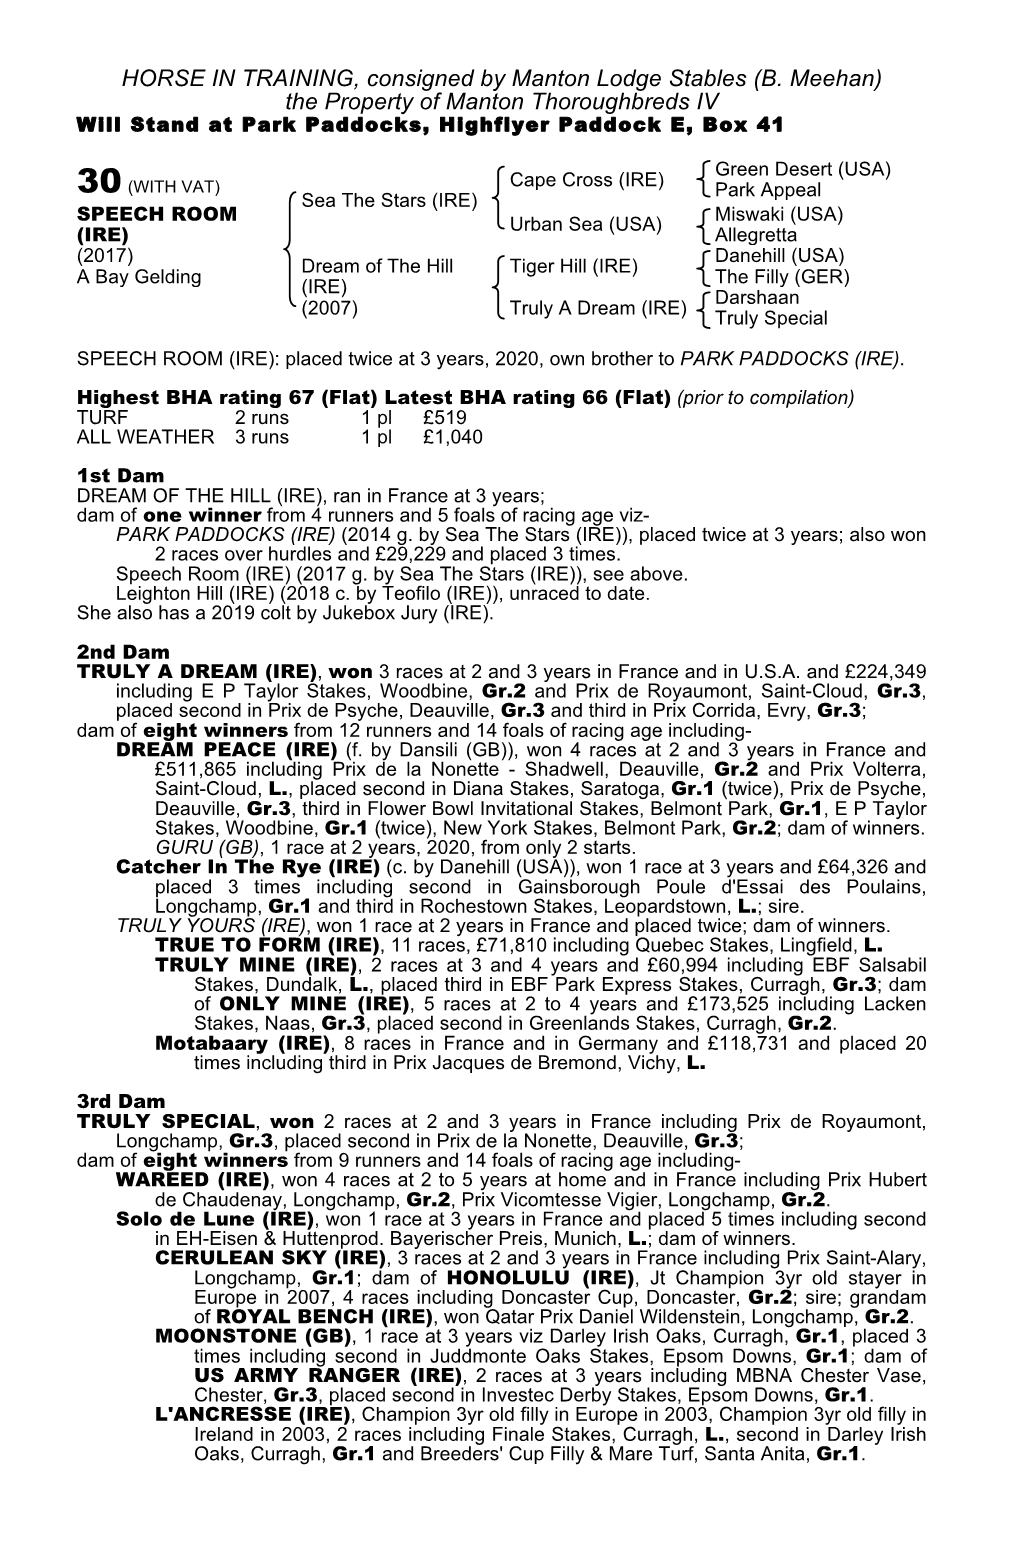 HORSE in TRAINING, Consigned by Manton Lodge Stables (B. Meehan) the Property of Manton Thoroughbreds IV Will Stand at Park Paddocks, Highflyer Paddock E, Box 41